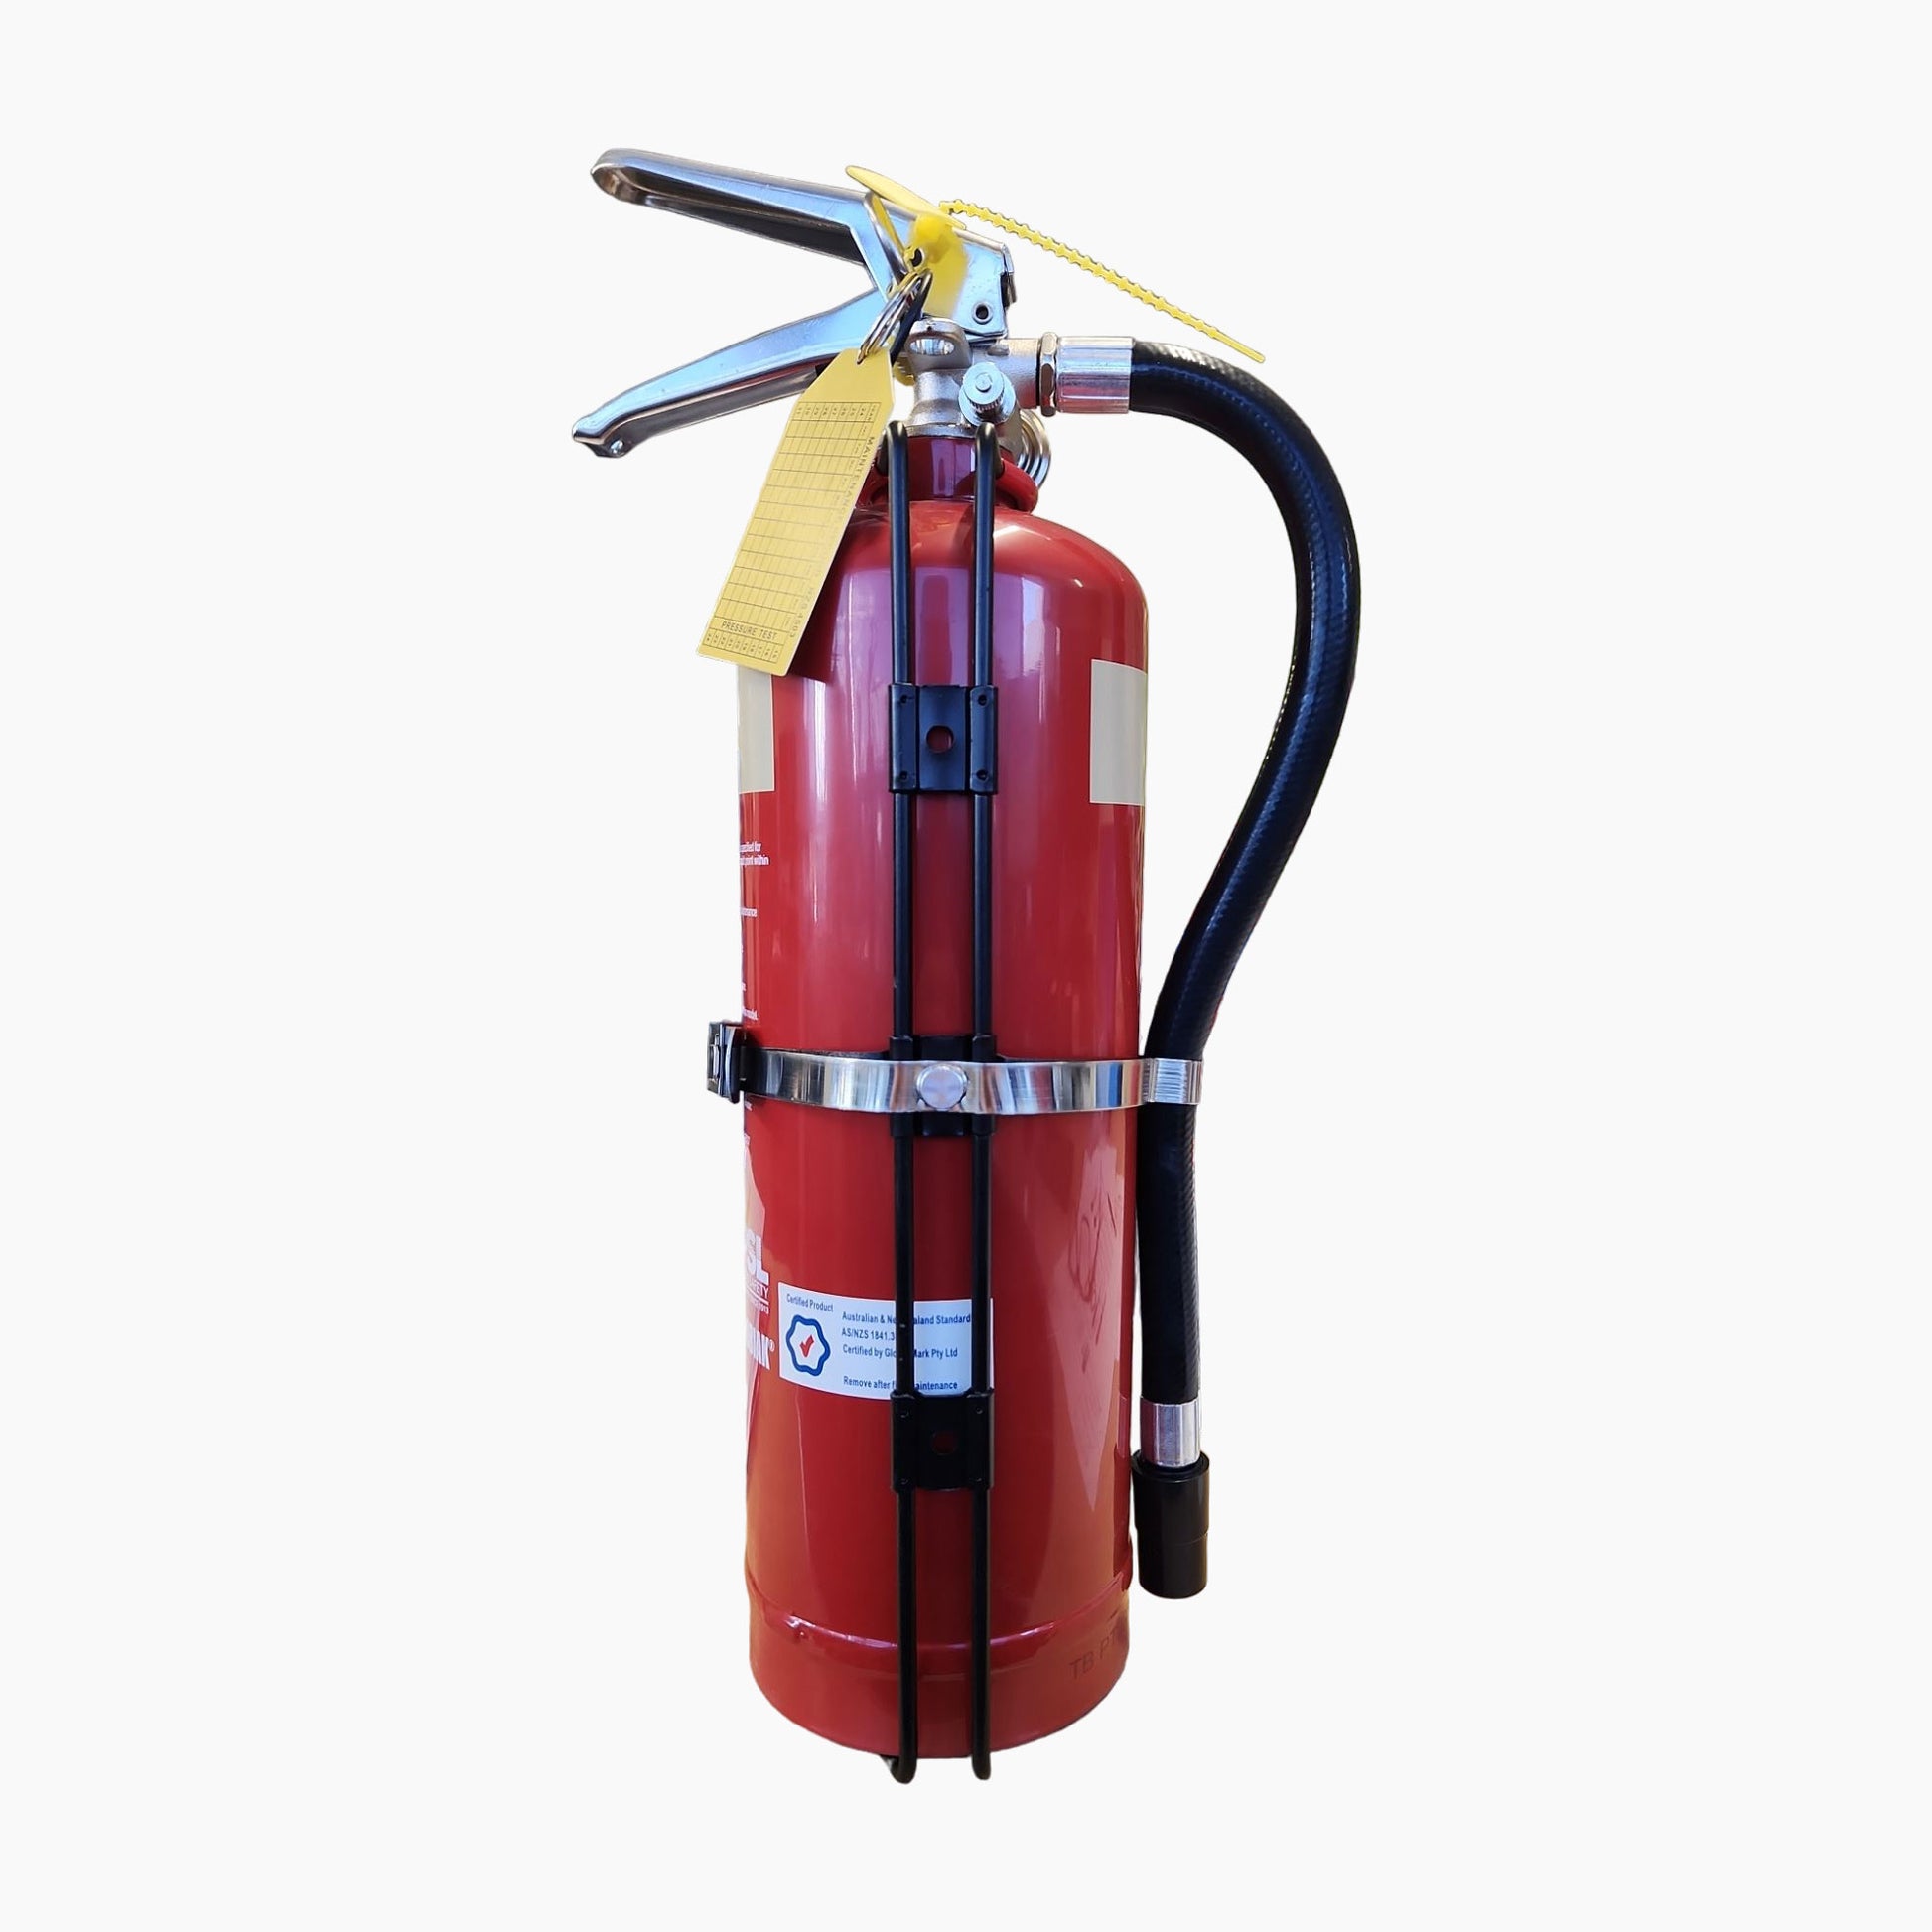 Flamefighter 2L Wet Chemical Extinguishers